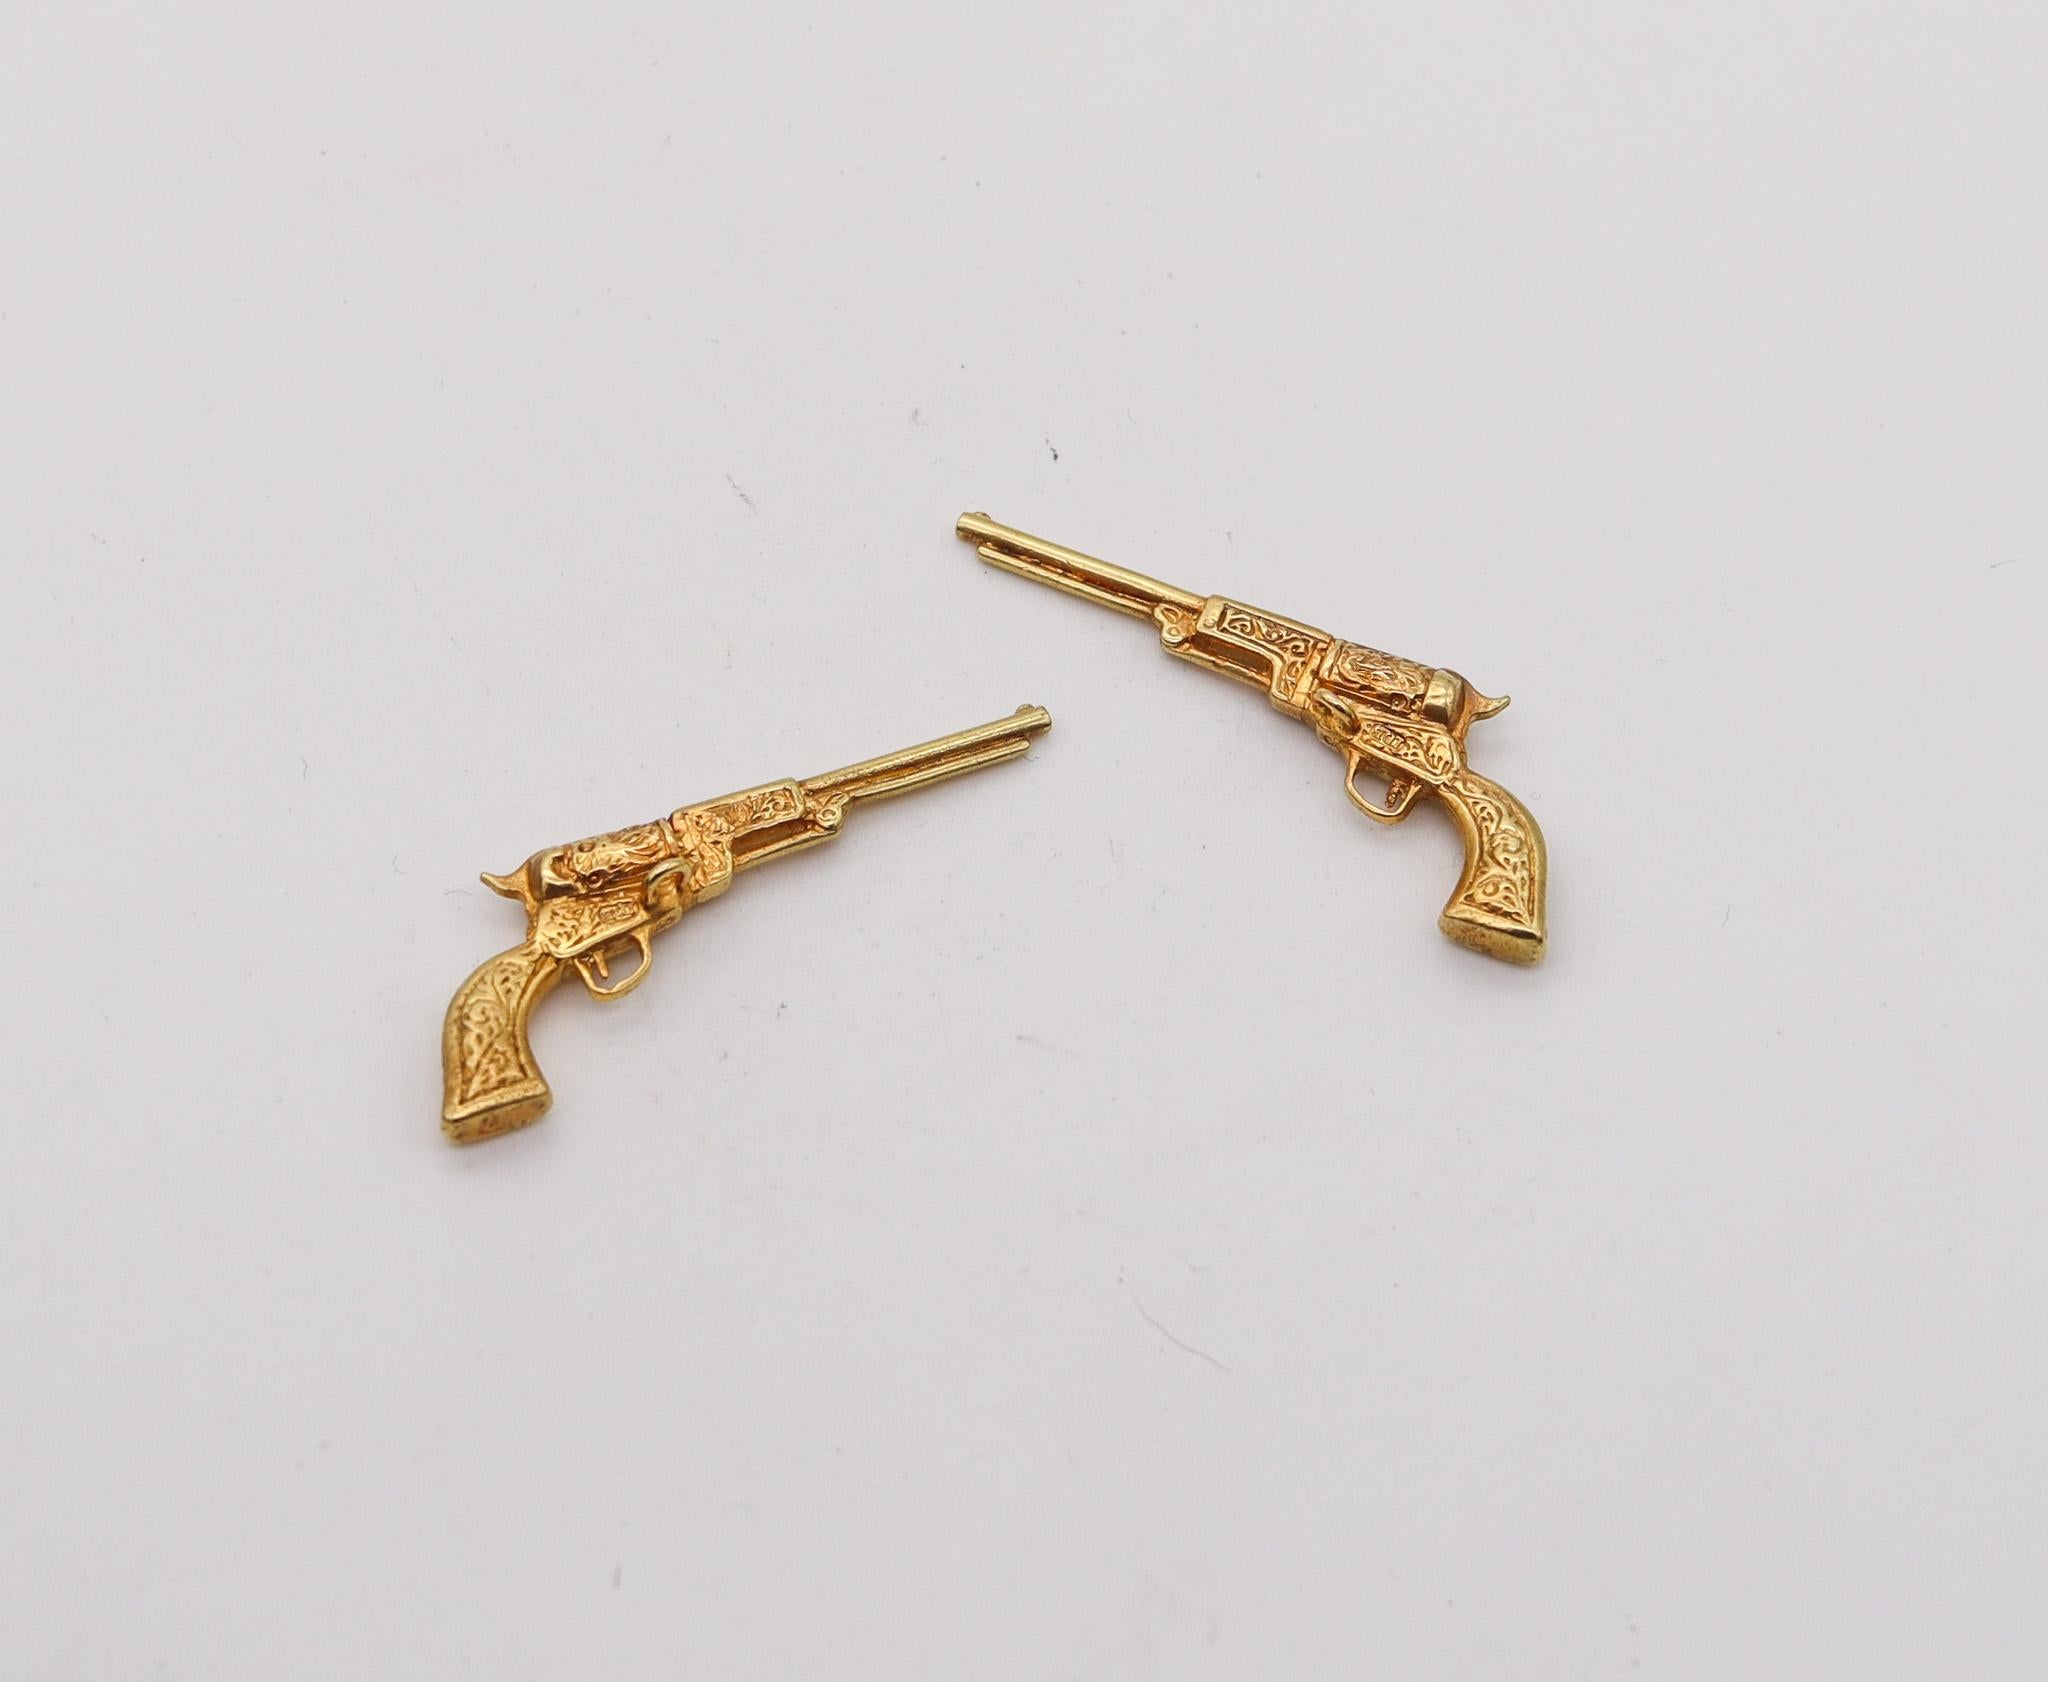 Wust & Co. 1915 Art Deco Pistol Cufflinks In 18Kt Yellow Gold With Fitted Box In Excellent Condition For Sale In Miami, FL